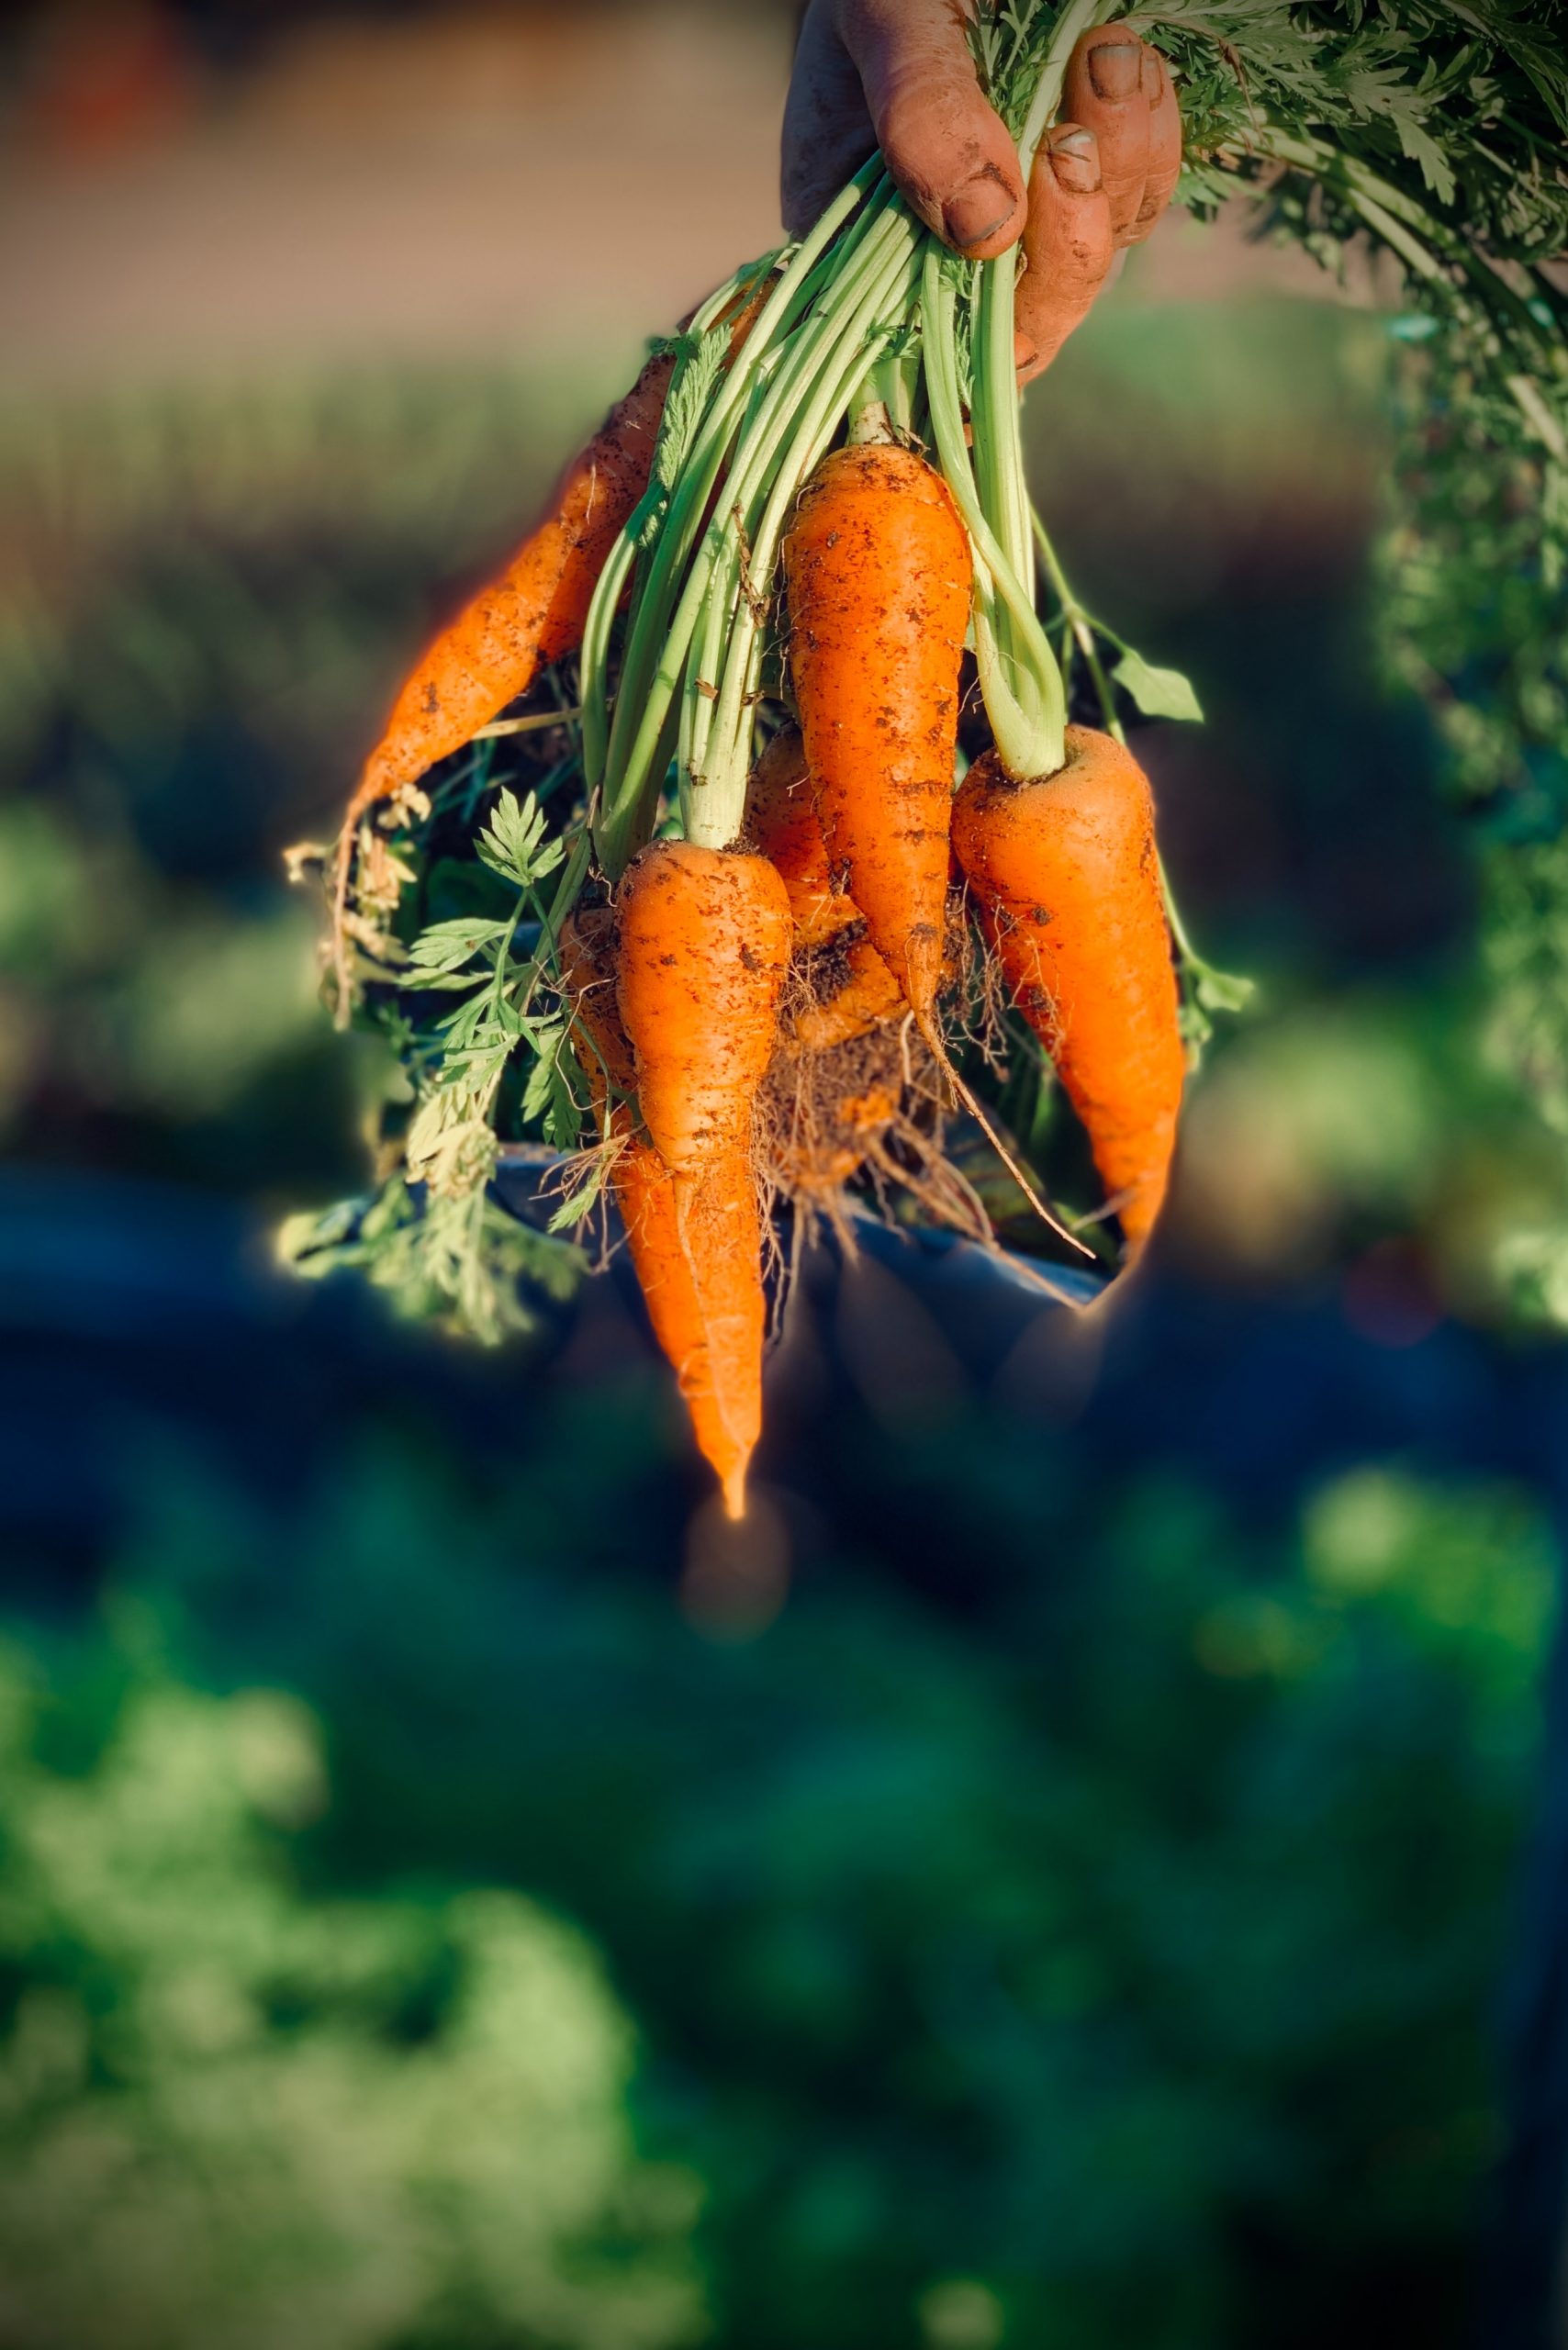 How Many Carrots Grow From One Seed?